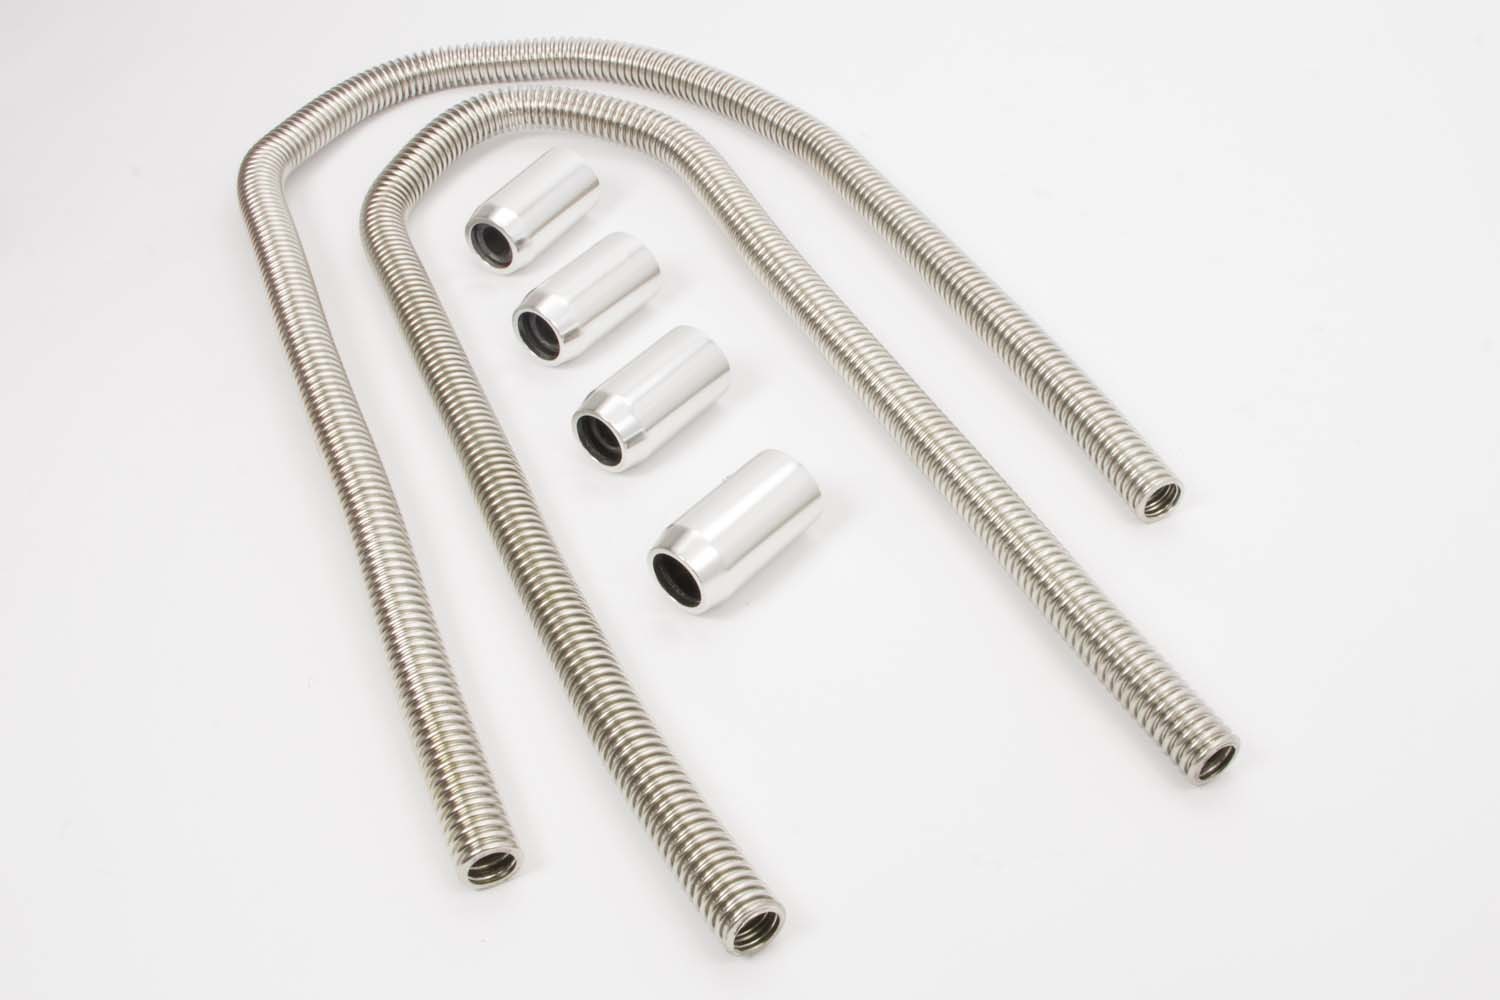 Racing Power Company R7314 Heater Hose Kit, 3/4 in OD Hose, Chrome End Caps / Adapters / Clamps / Reducers, Stainless, Polished, Kit